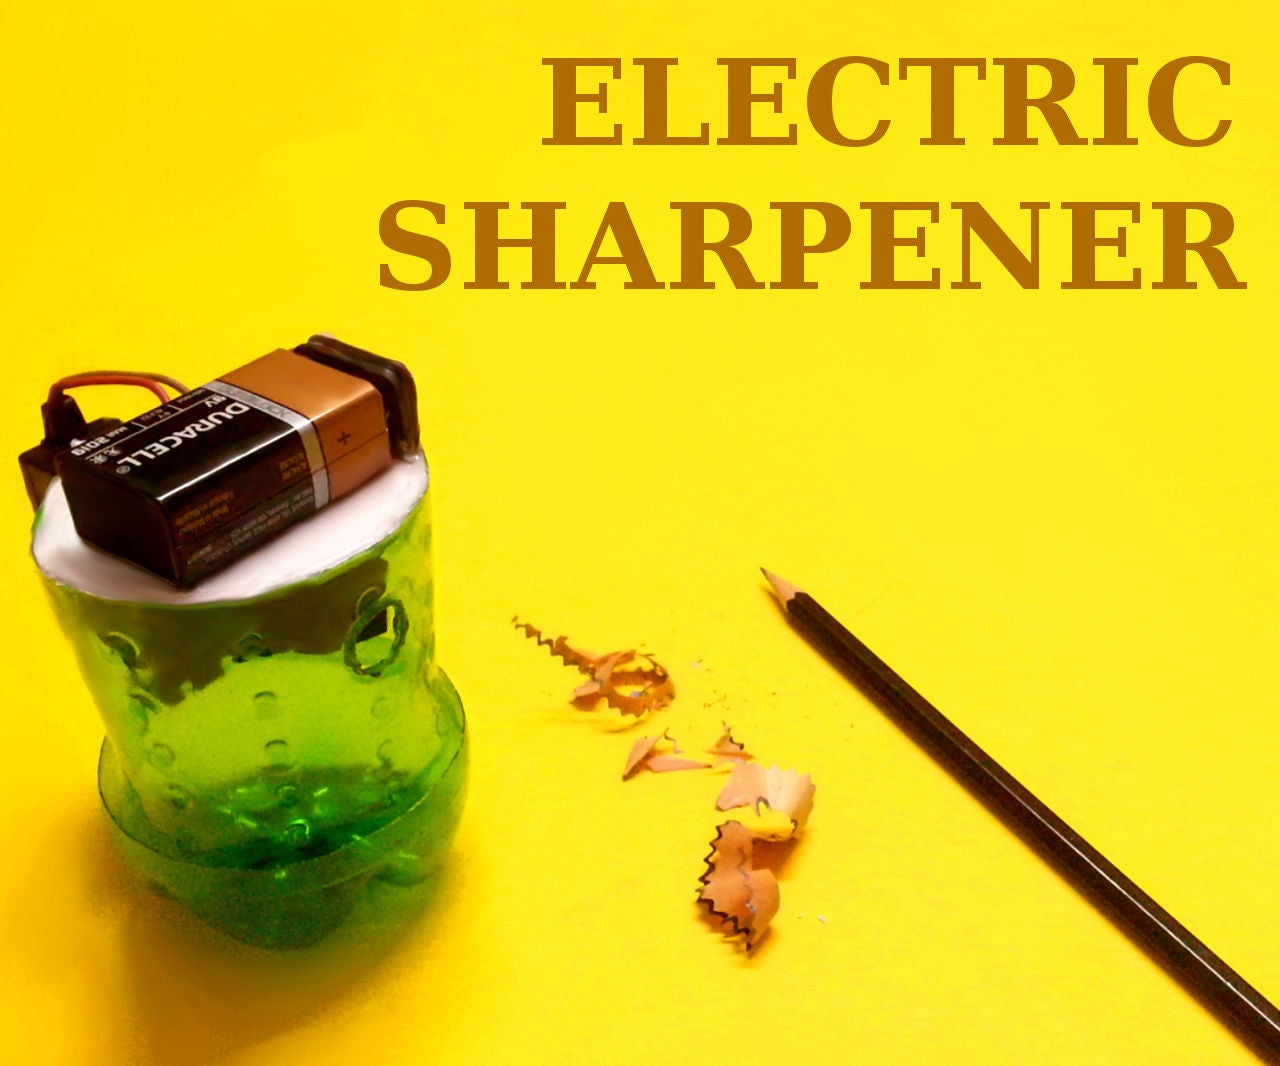 How to Make Electric Pencil Sharpener